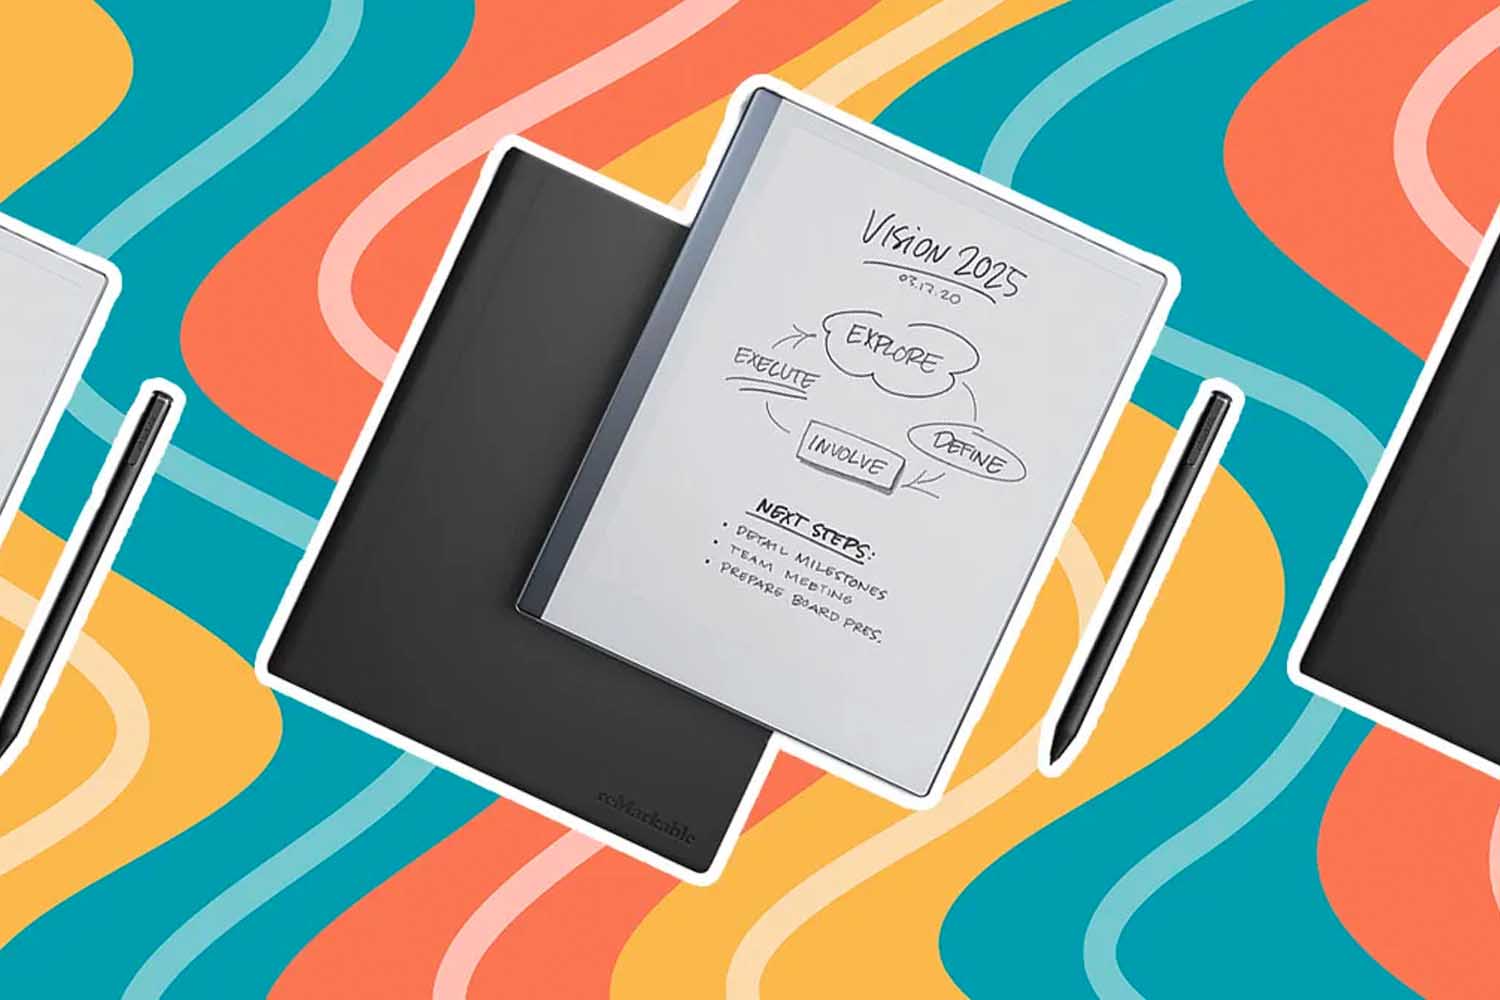 The reMarkable tablet wants to replace all your paper notebooks